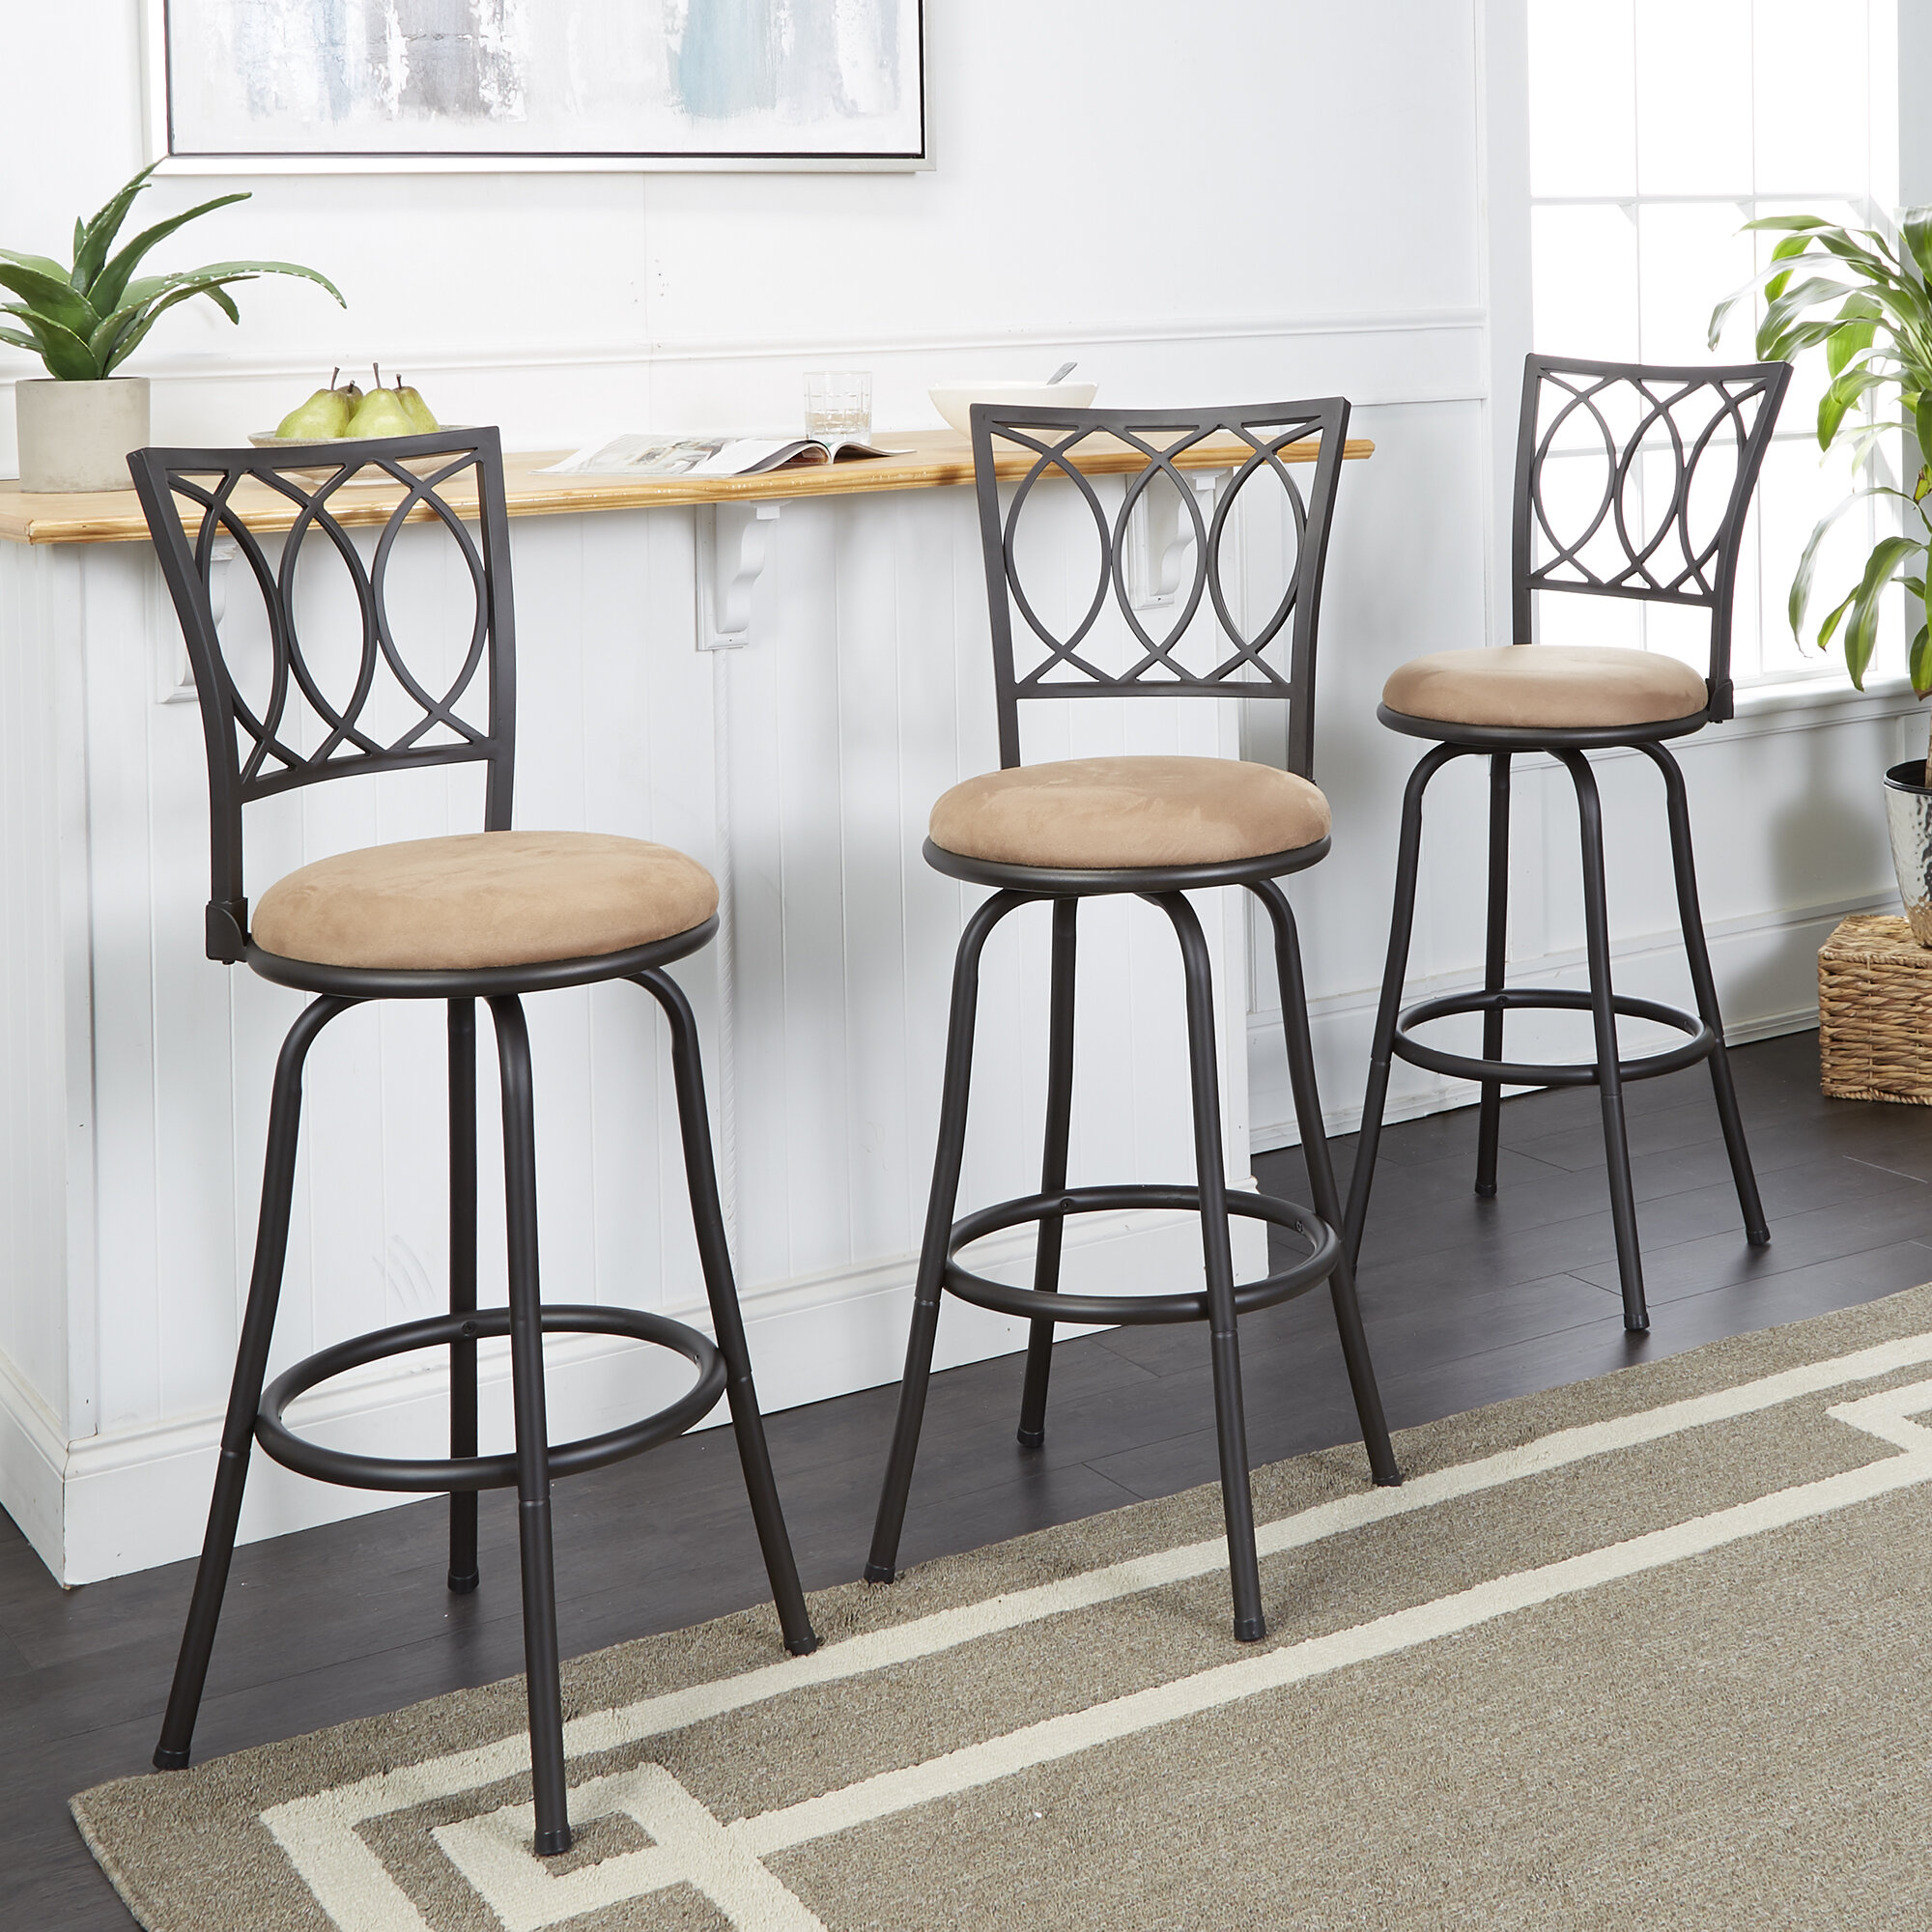 Set of 3 Bar Set Height Adjustable Round Bar Table with 2 Bar Stools Bistro Set Black Bar Table Blackish-Green Leather Swivel Barstool Chairs with Chrome Base Footrest for Kitchen Club Pub Breakfast